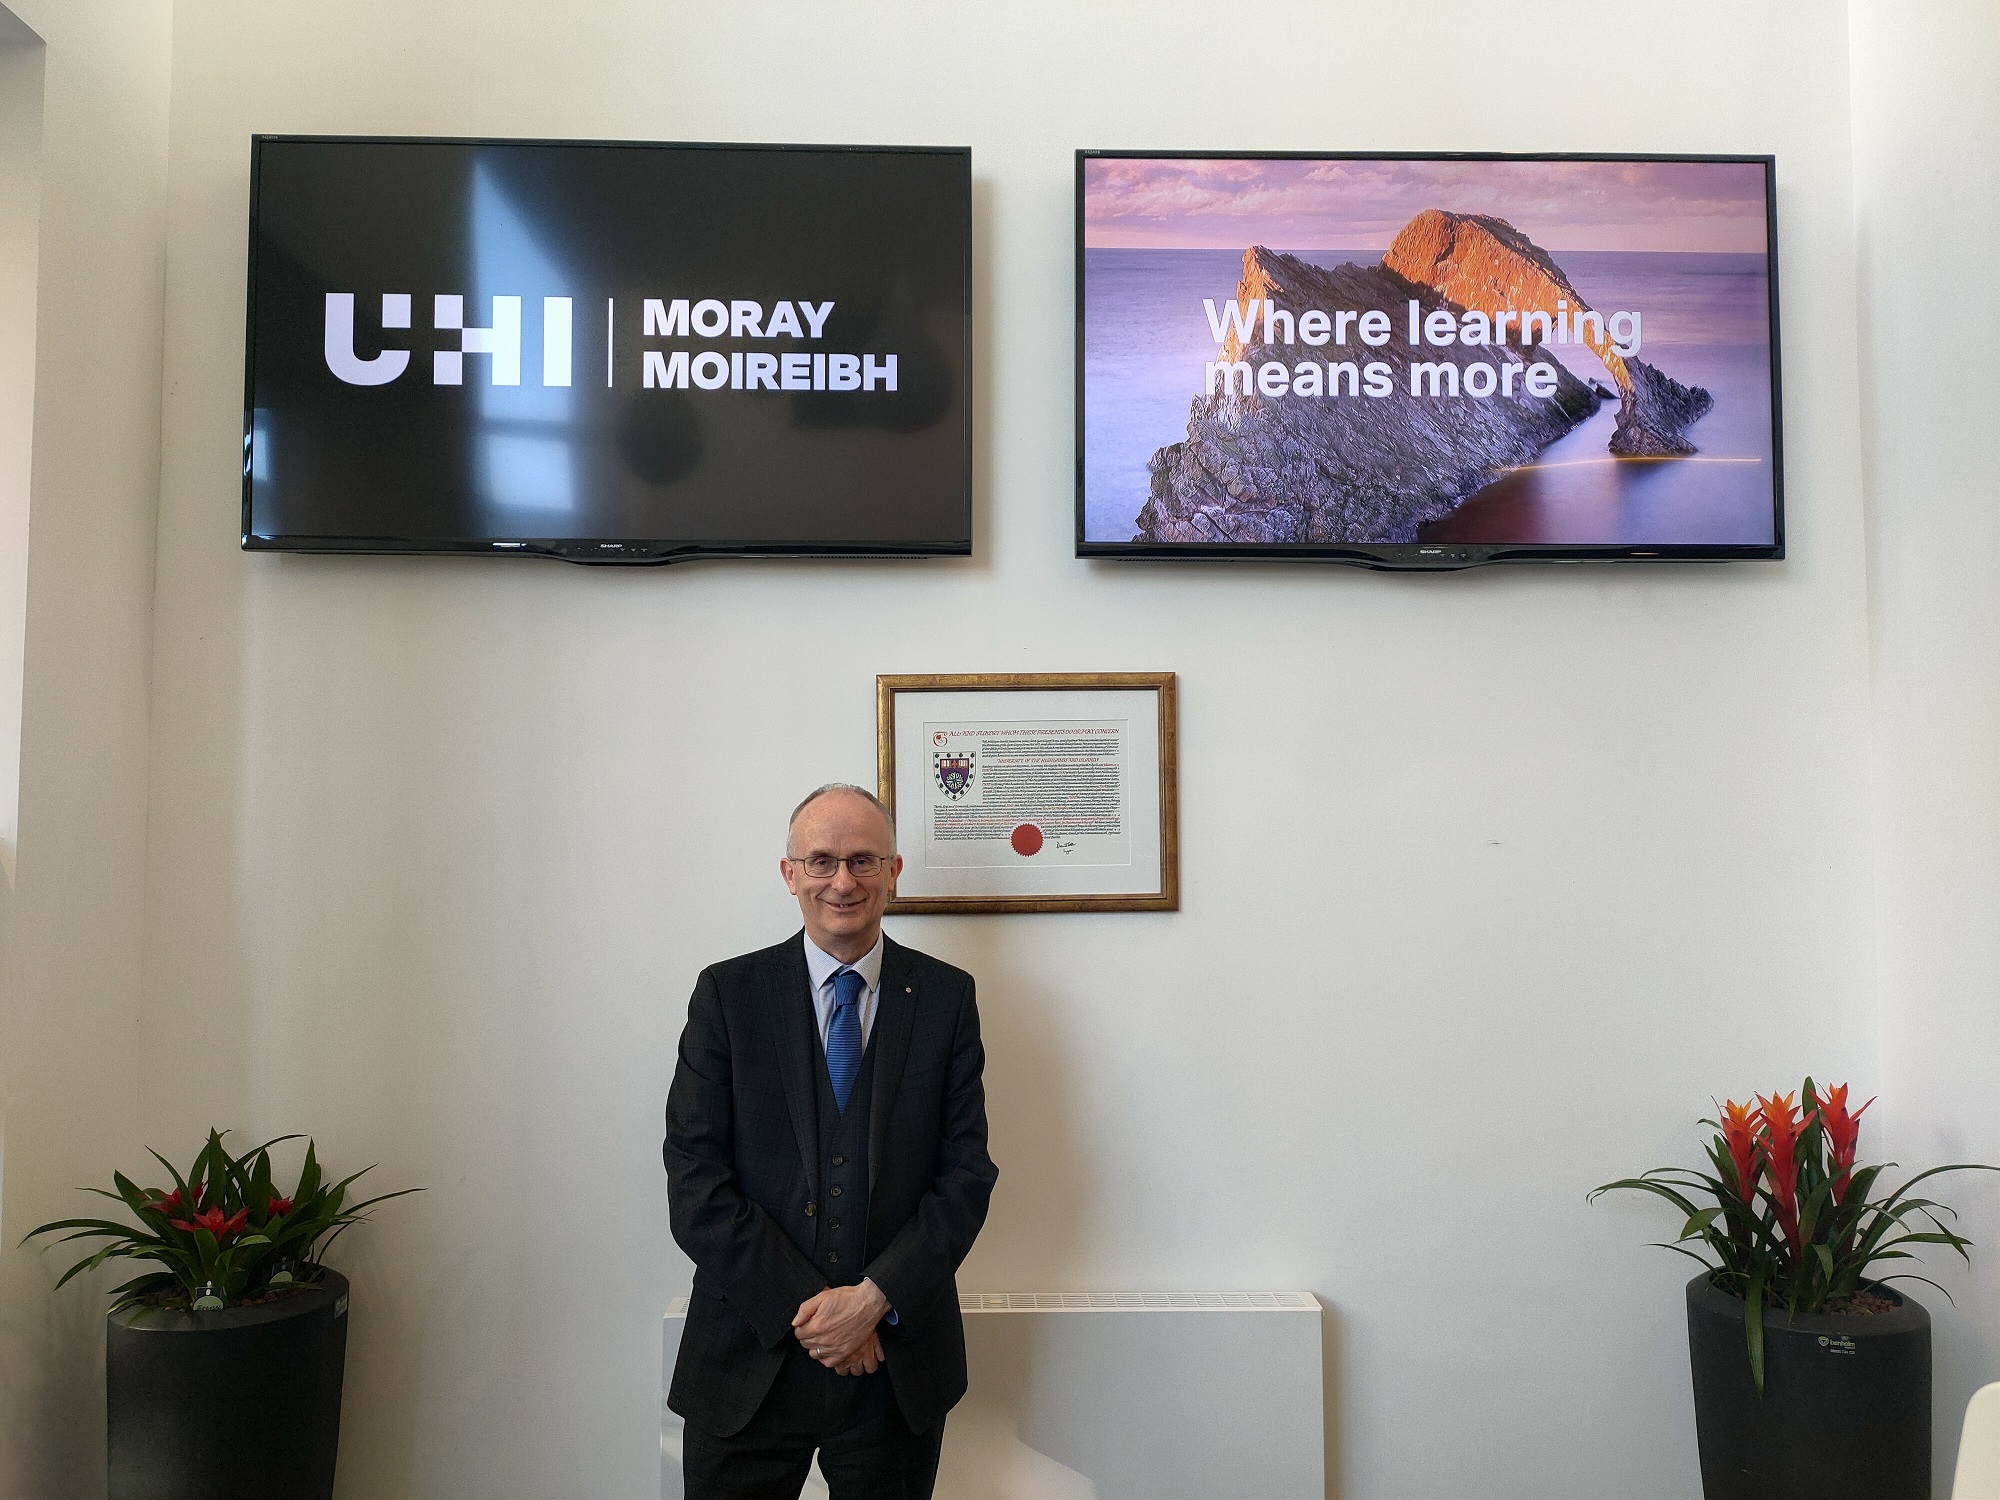 Fresh look for UHI signals shift to where learning means more